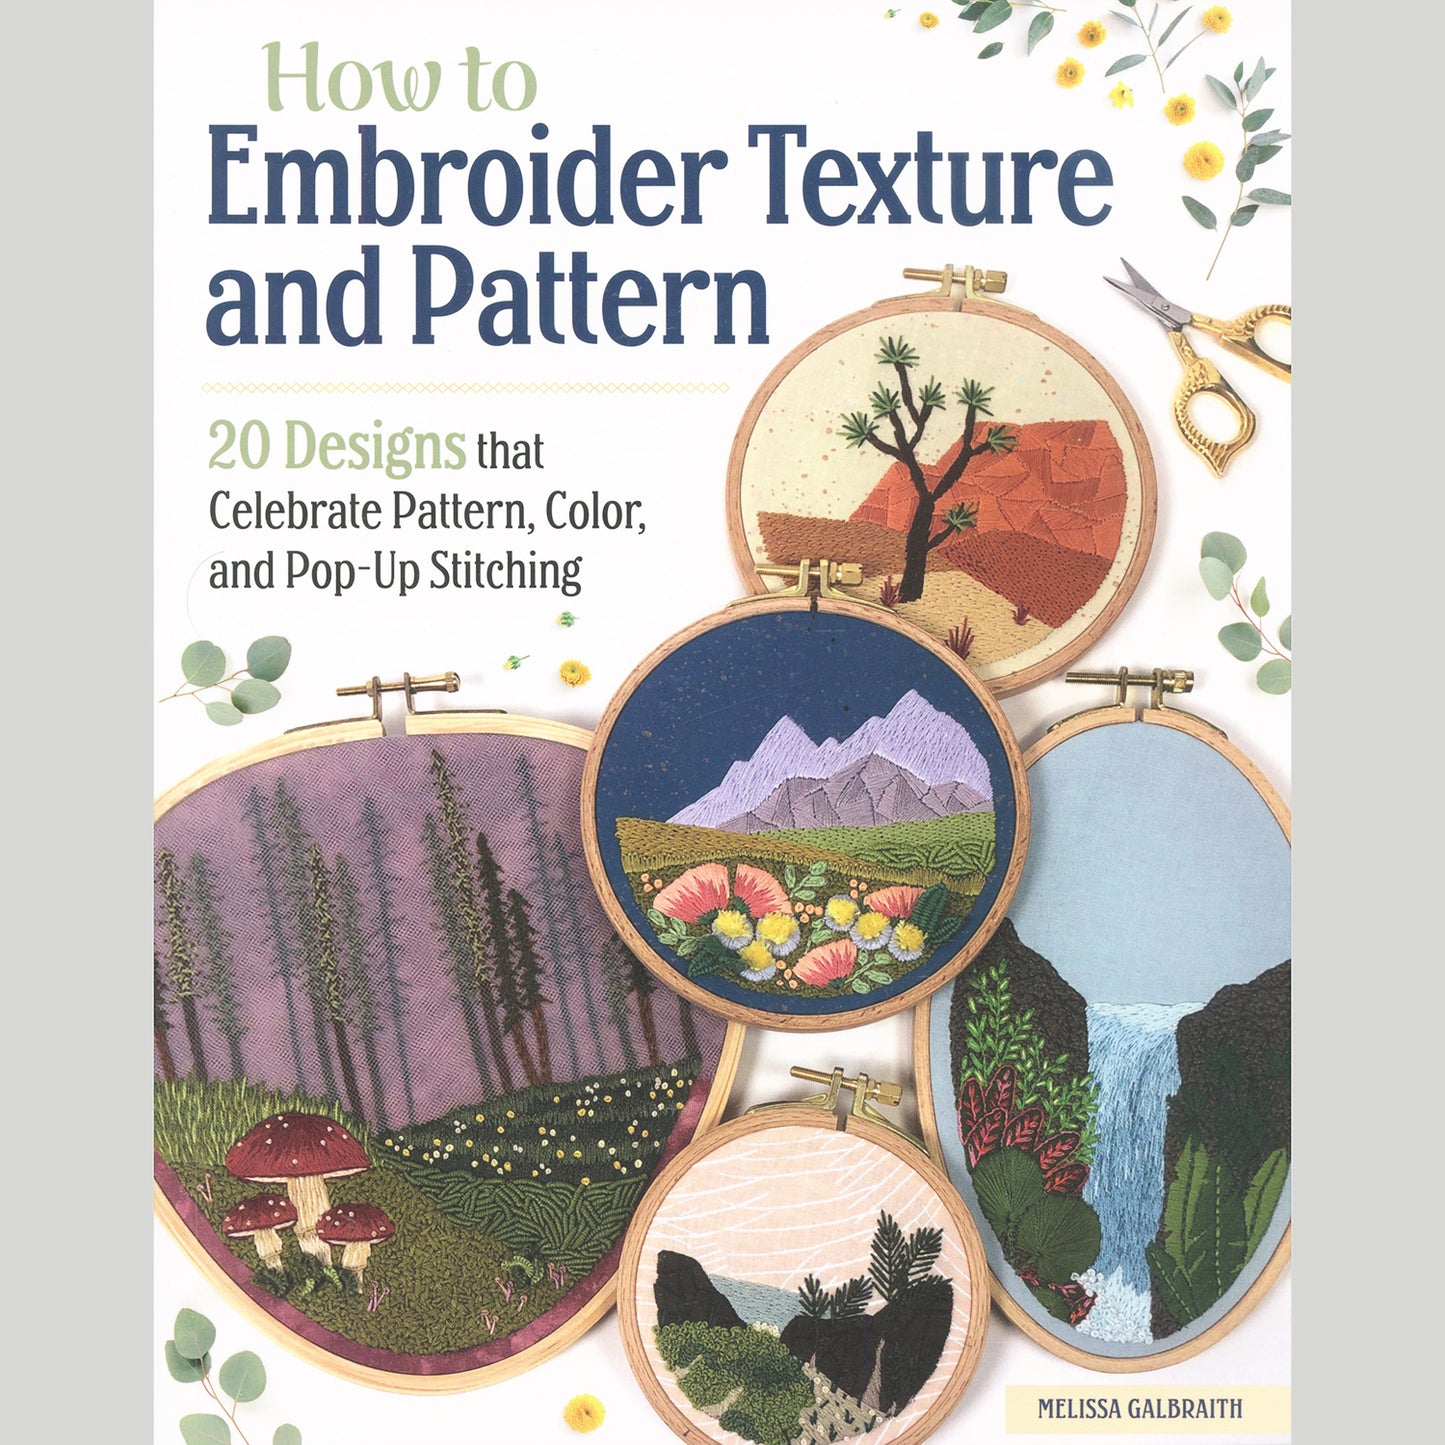 How to Embroider Texture and Pattern Book Primary Image